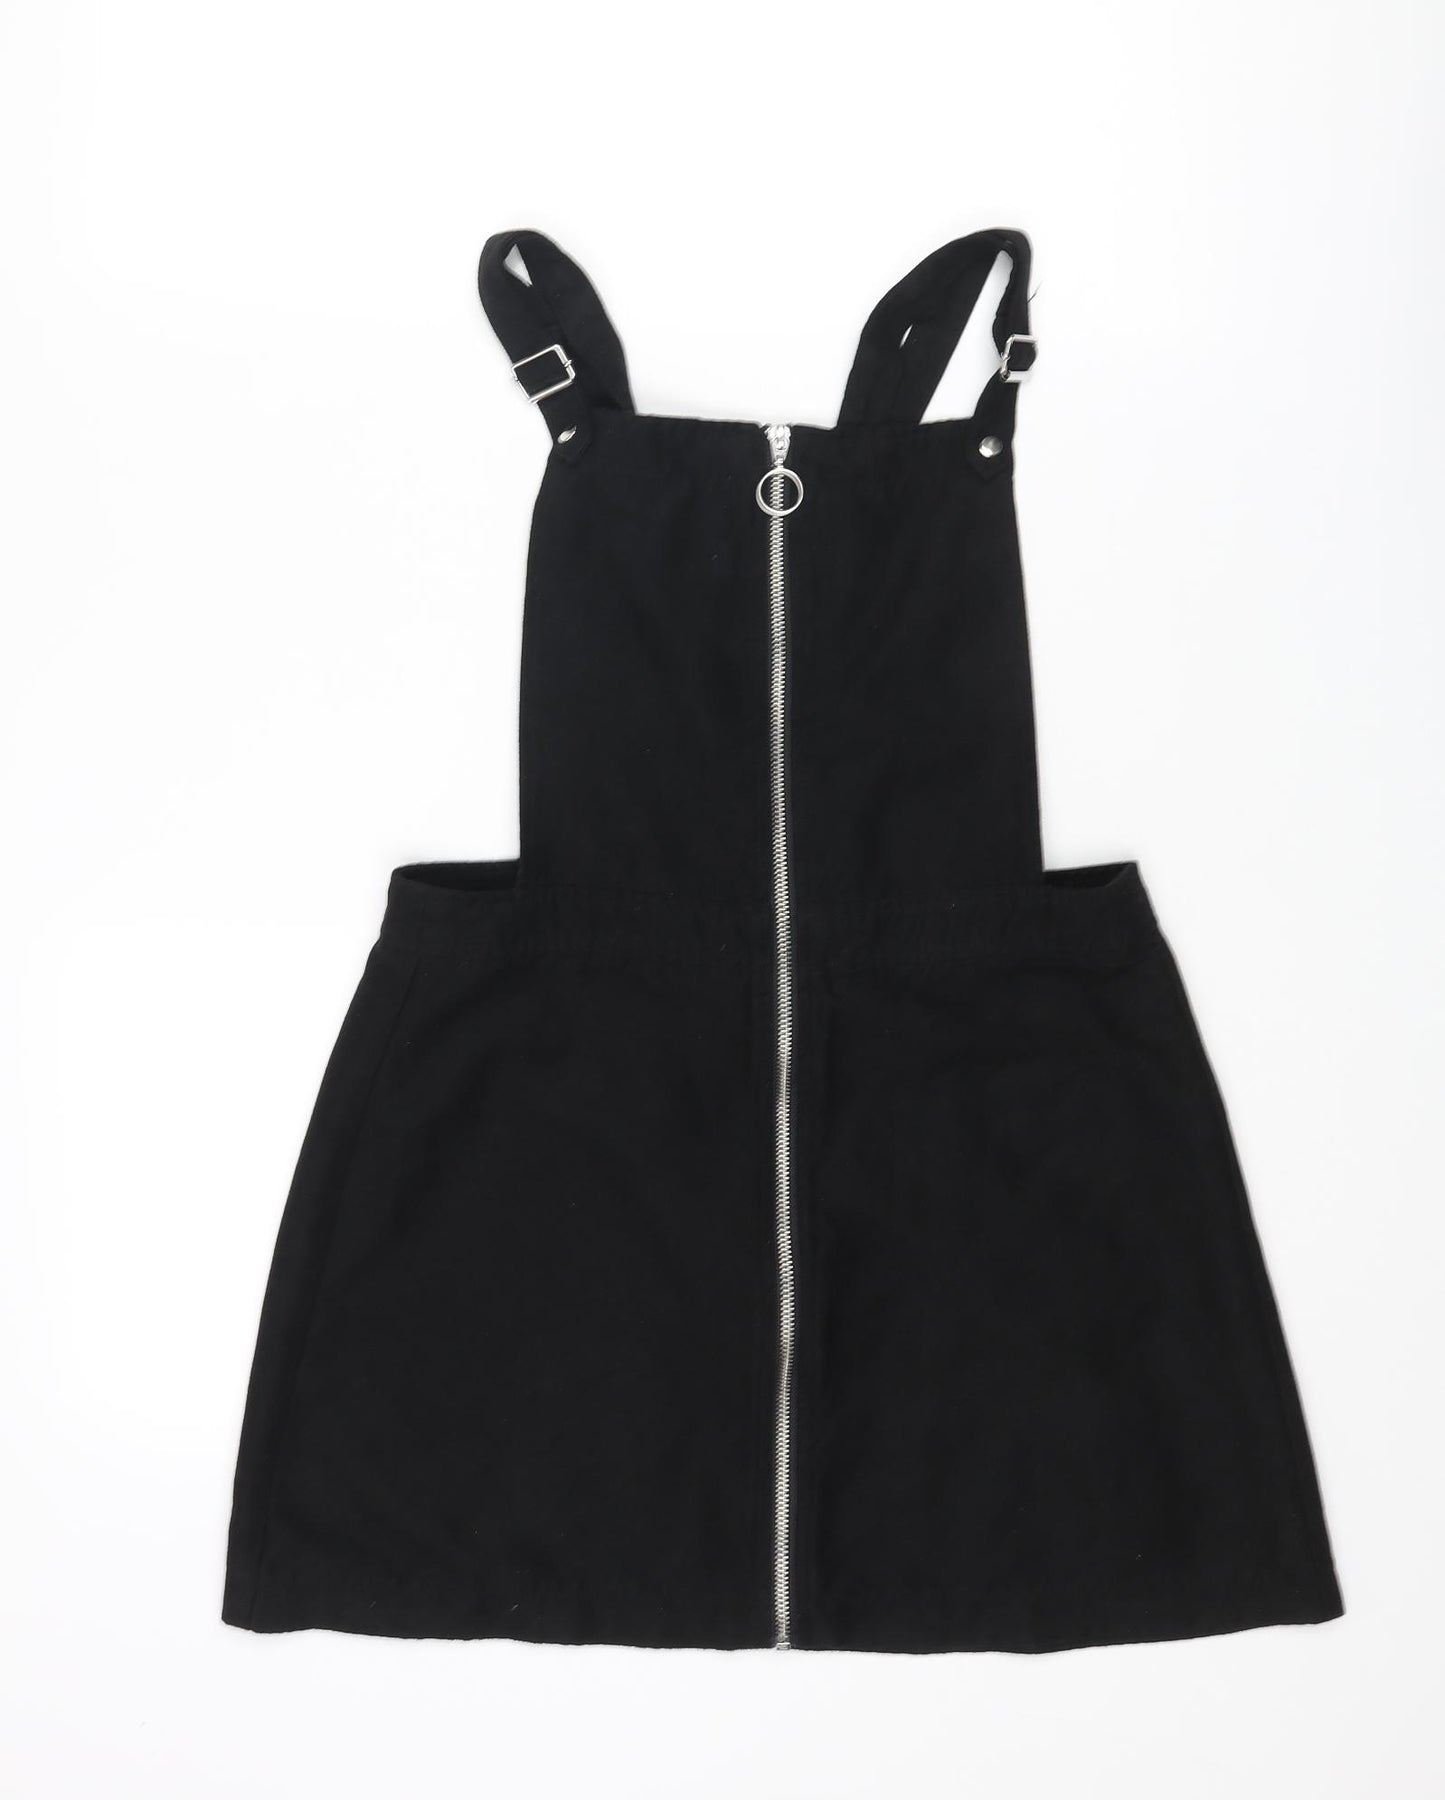 Divided by H&M Womens Black Polyester Pinafore/Dungaree Dress Size 12 Square Neck Zip